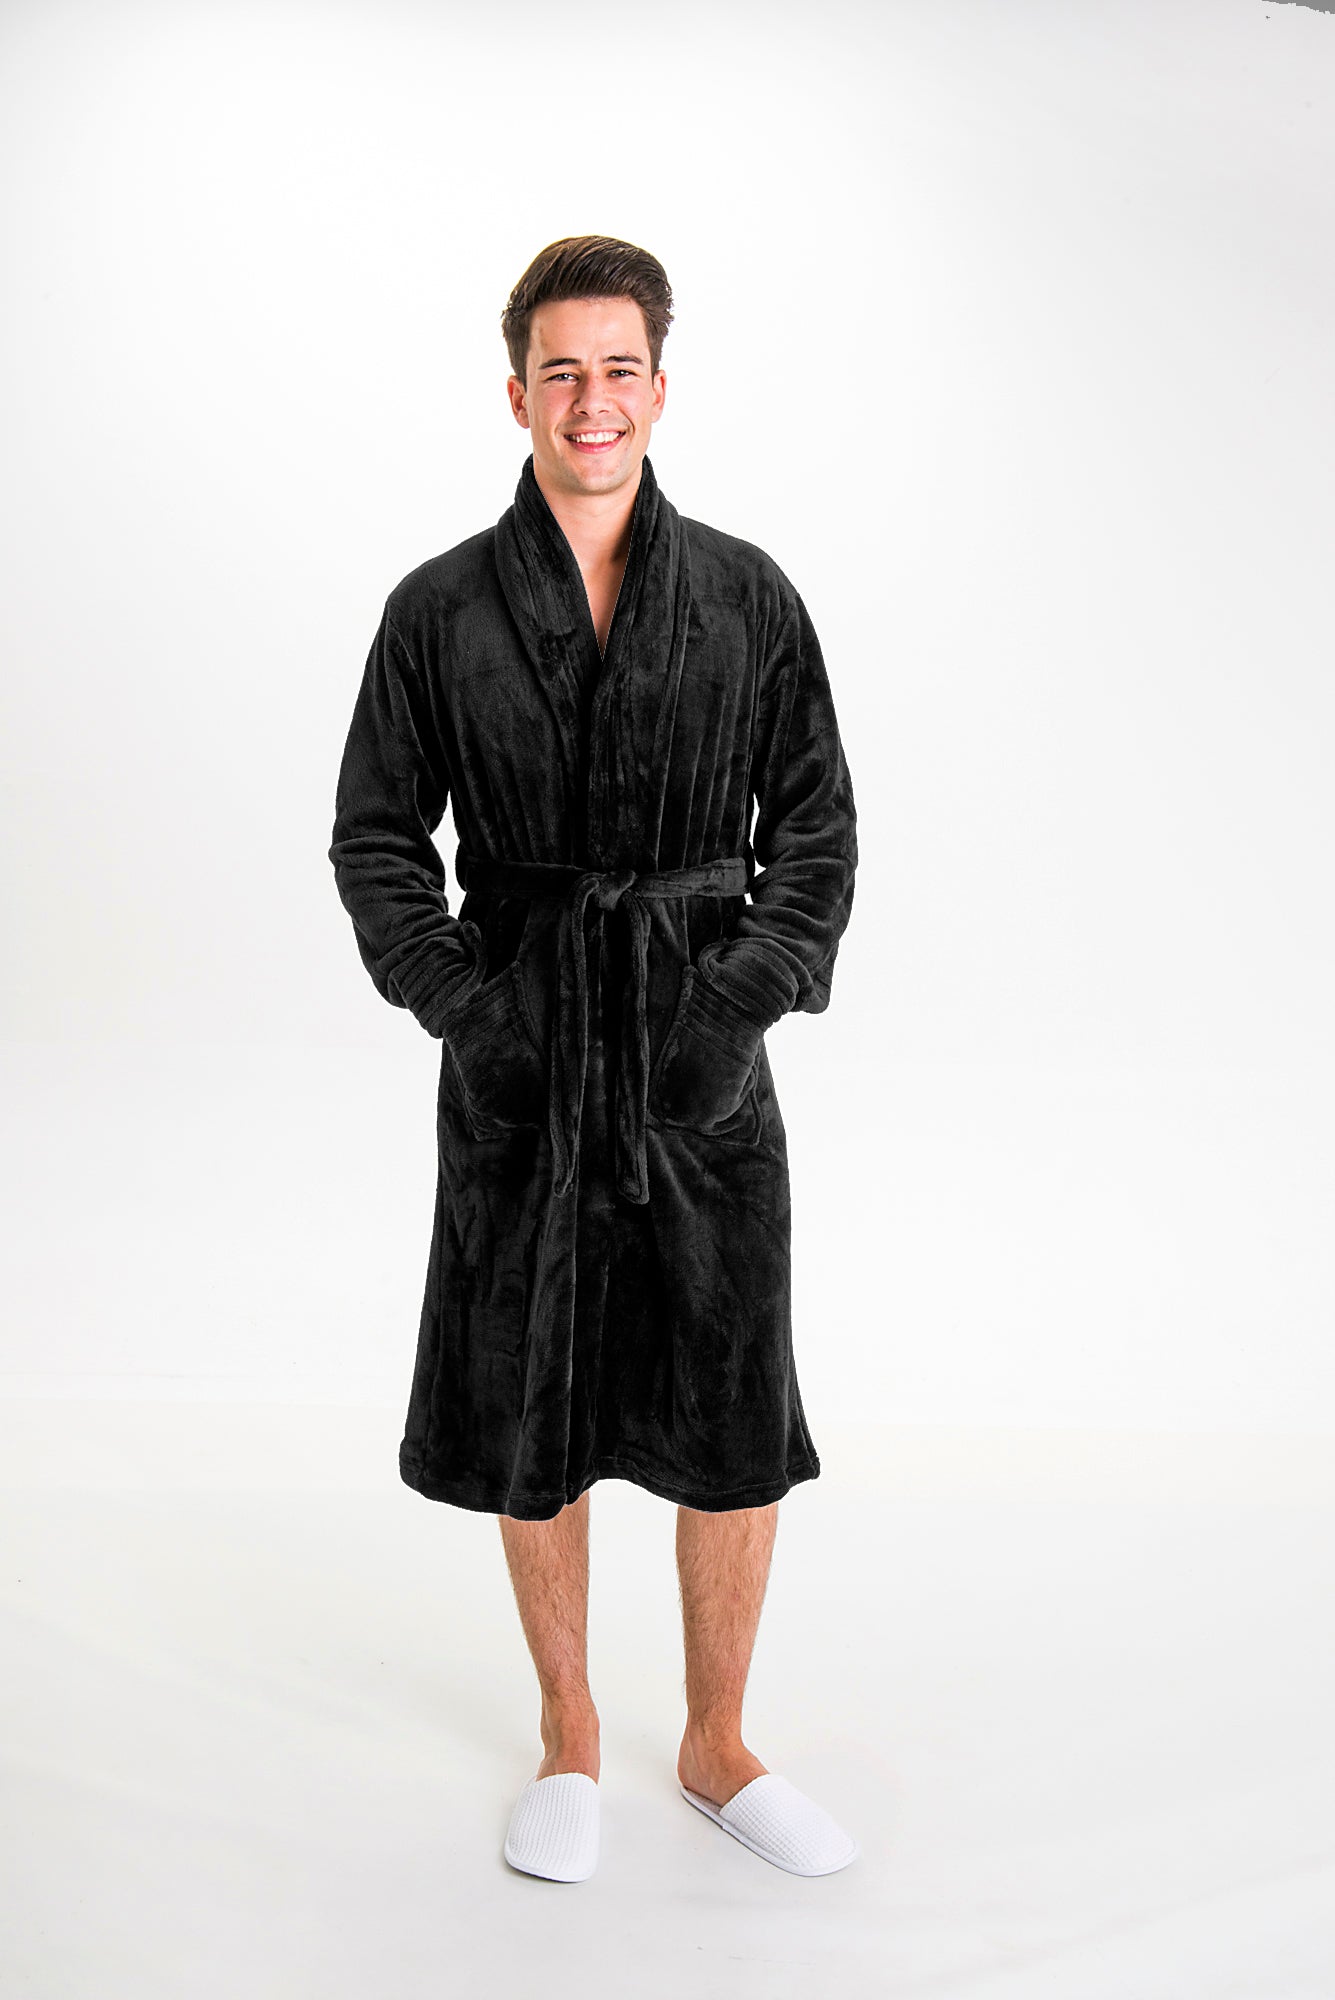 Mens luxurious fluffy robe hamper with short pyjamas, socks and chocolates presented in a gift box